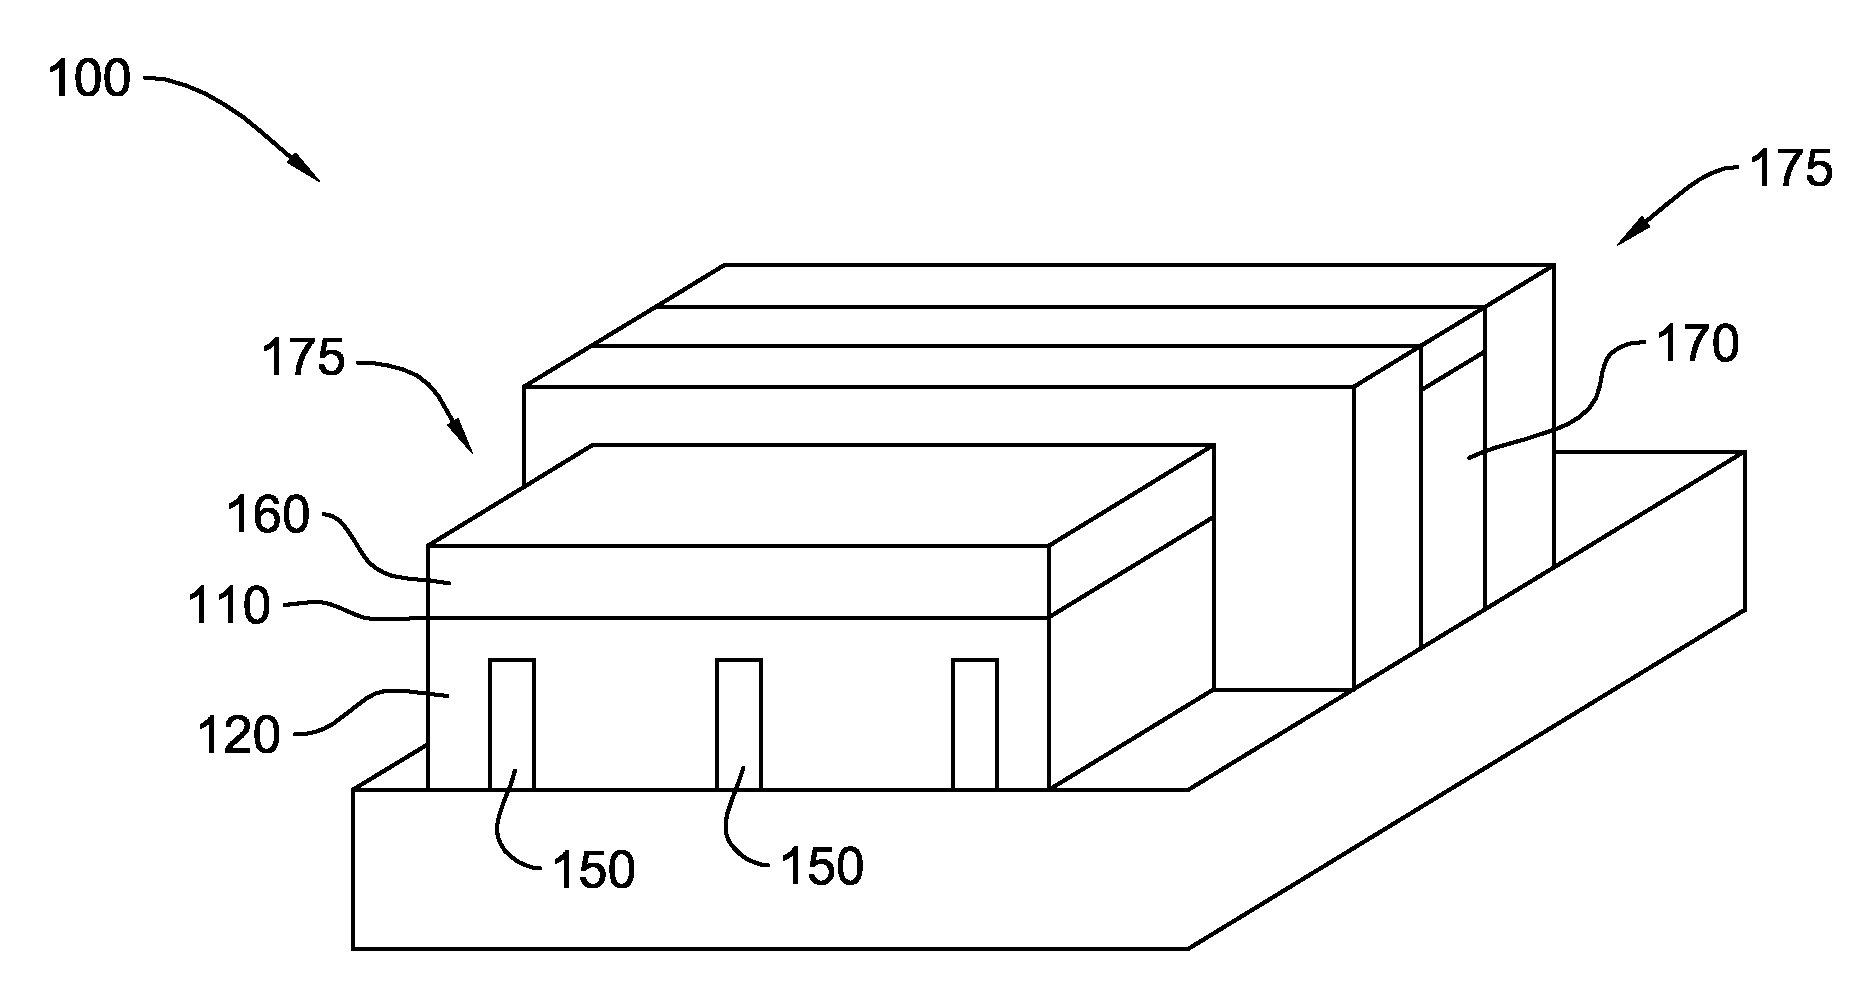 Fin-type field effect transistor structure with merged source/drain silicide and method of forming the structure